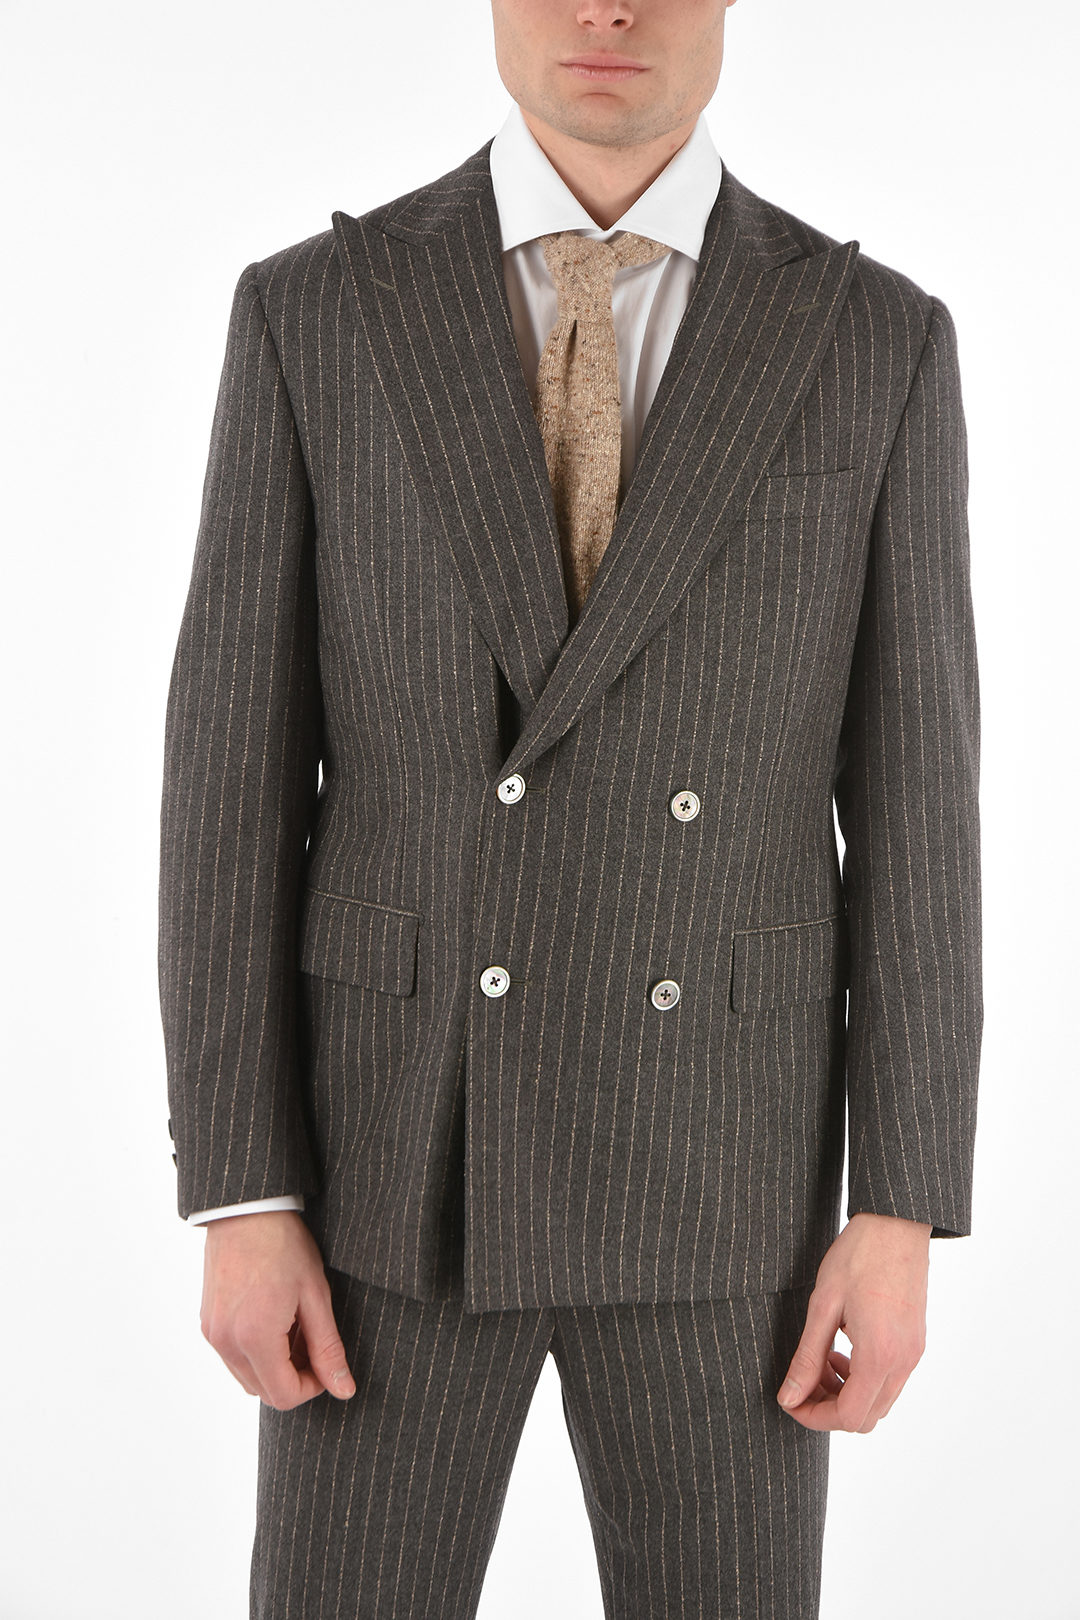 Corneliani Pinstriped Double Breasted Suit ACADEMY with Peak Lapel men ...